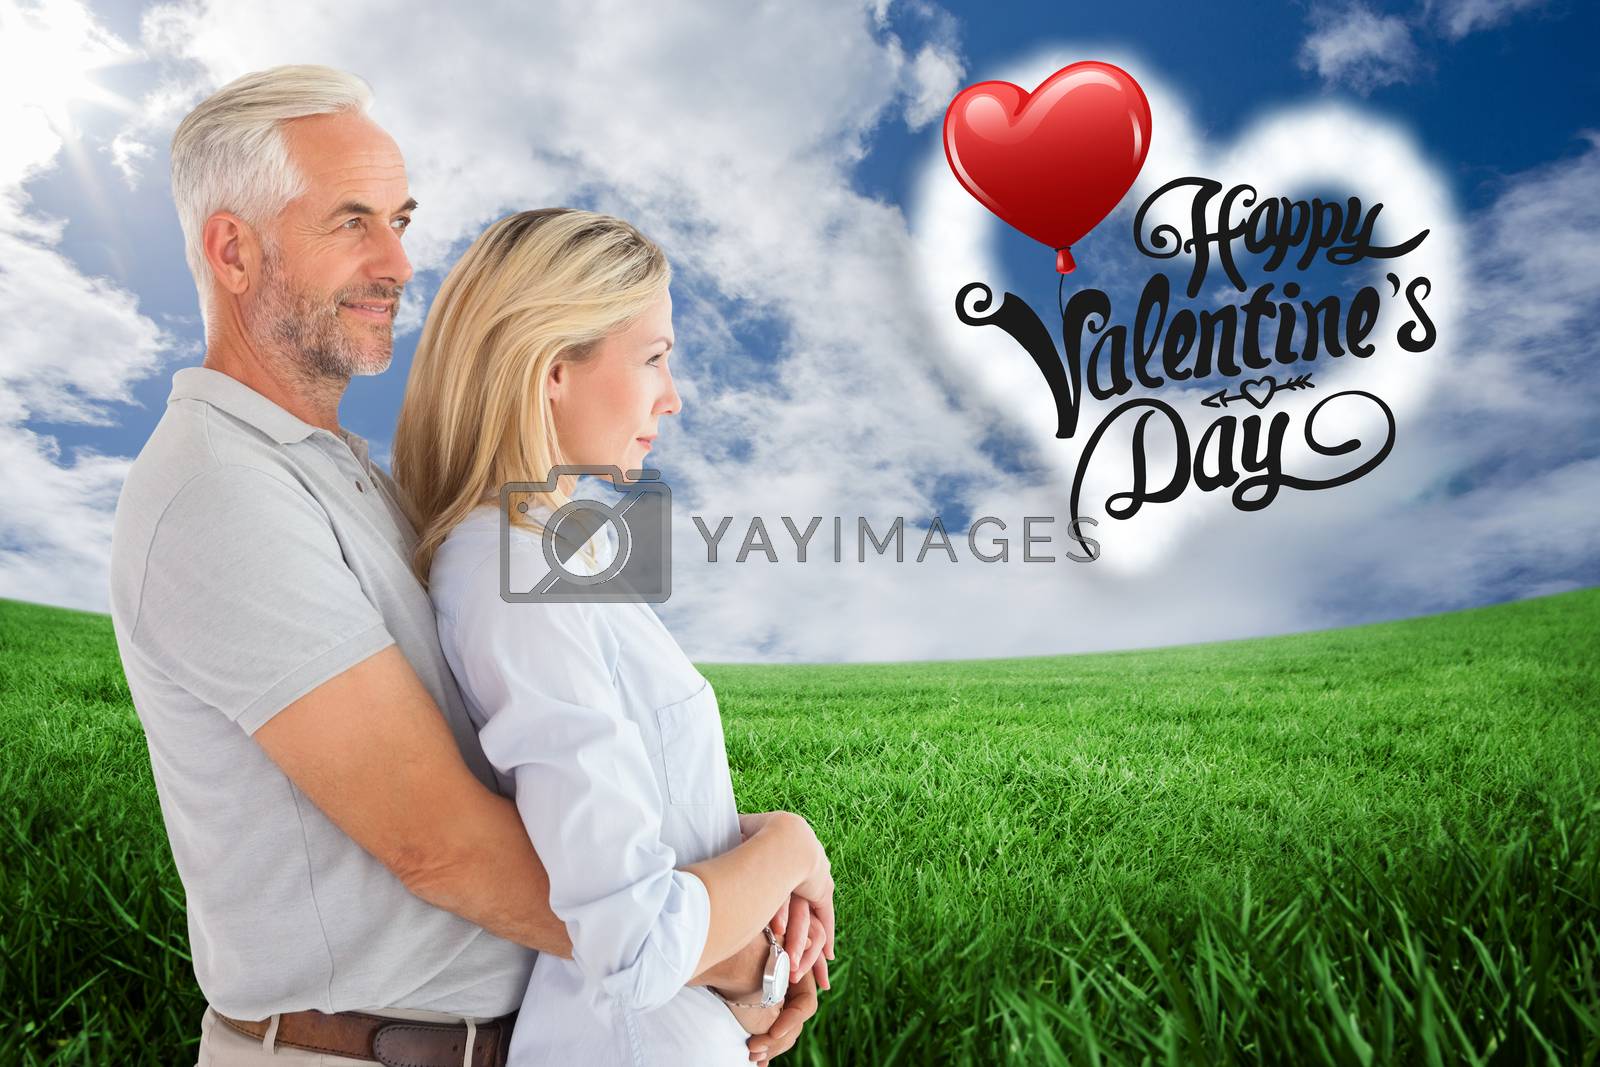 Royalty free image of Composite image of happy couple smiling and embracing by Wavebreakmedia